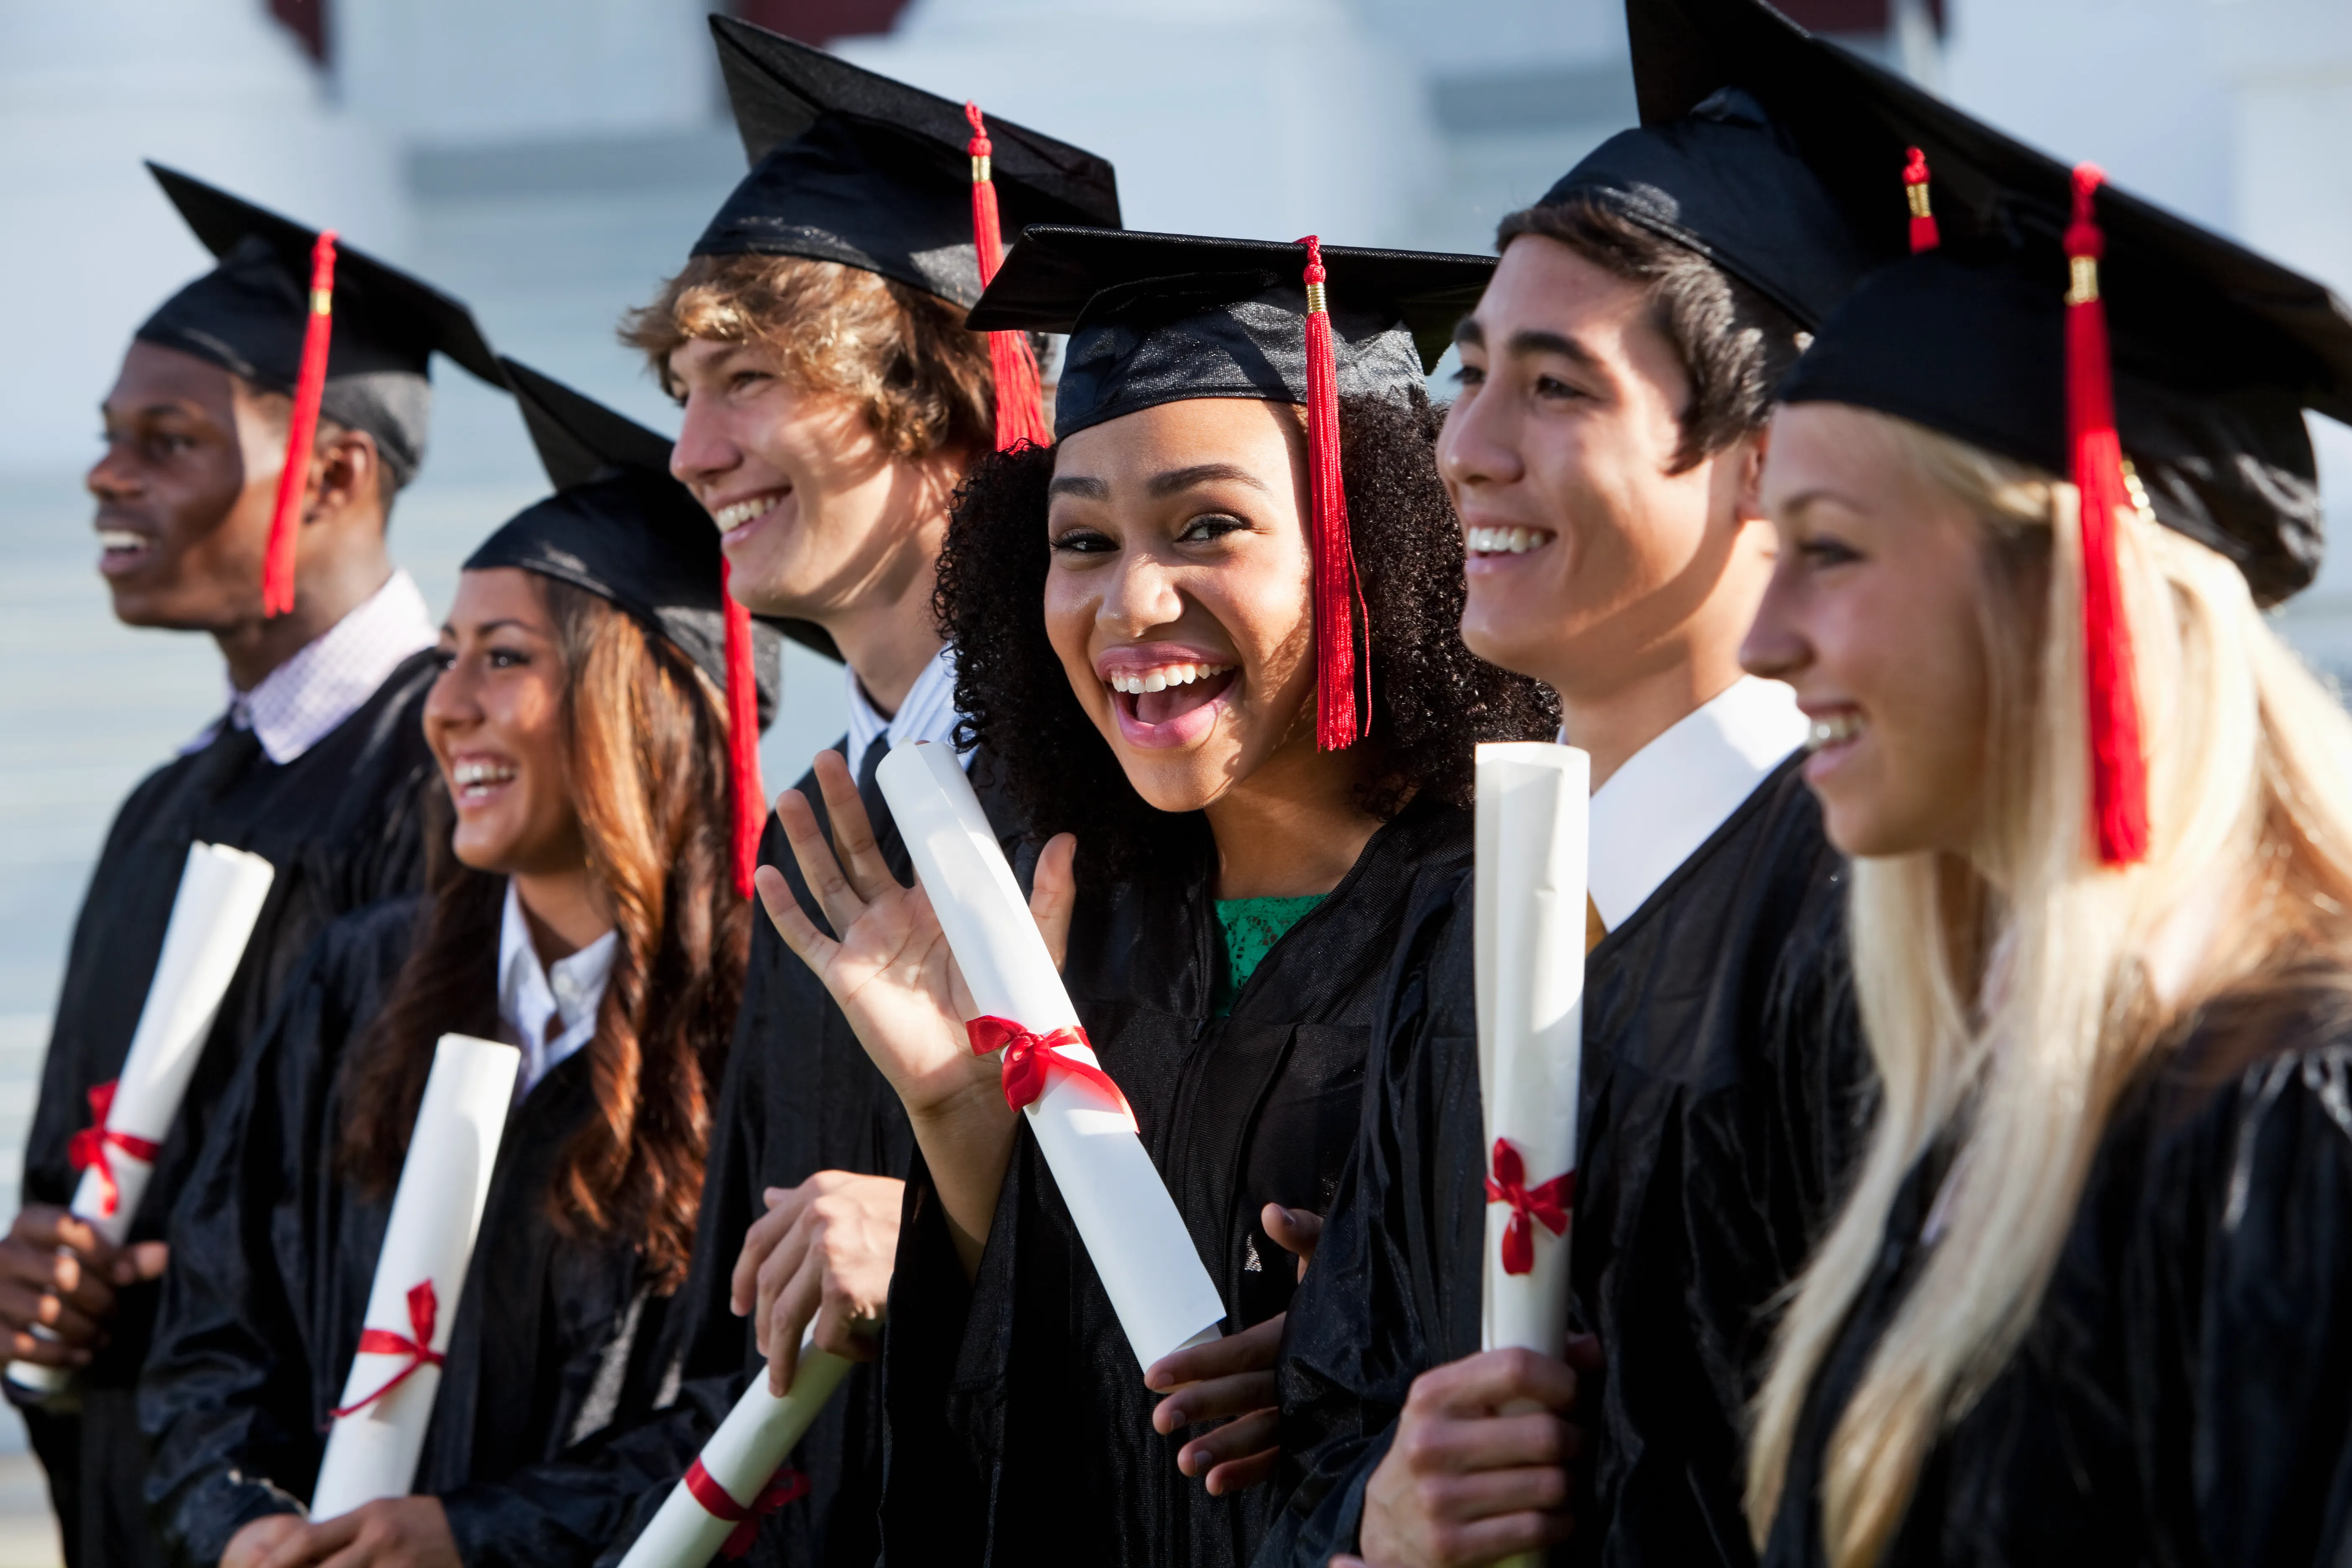 Stock image of graduates in caps and gowns holding diplomas